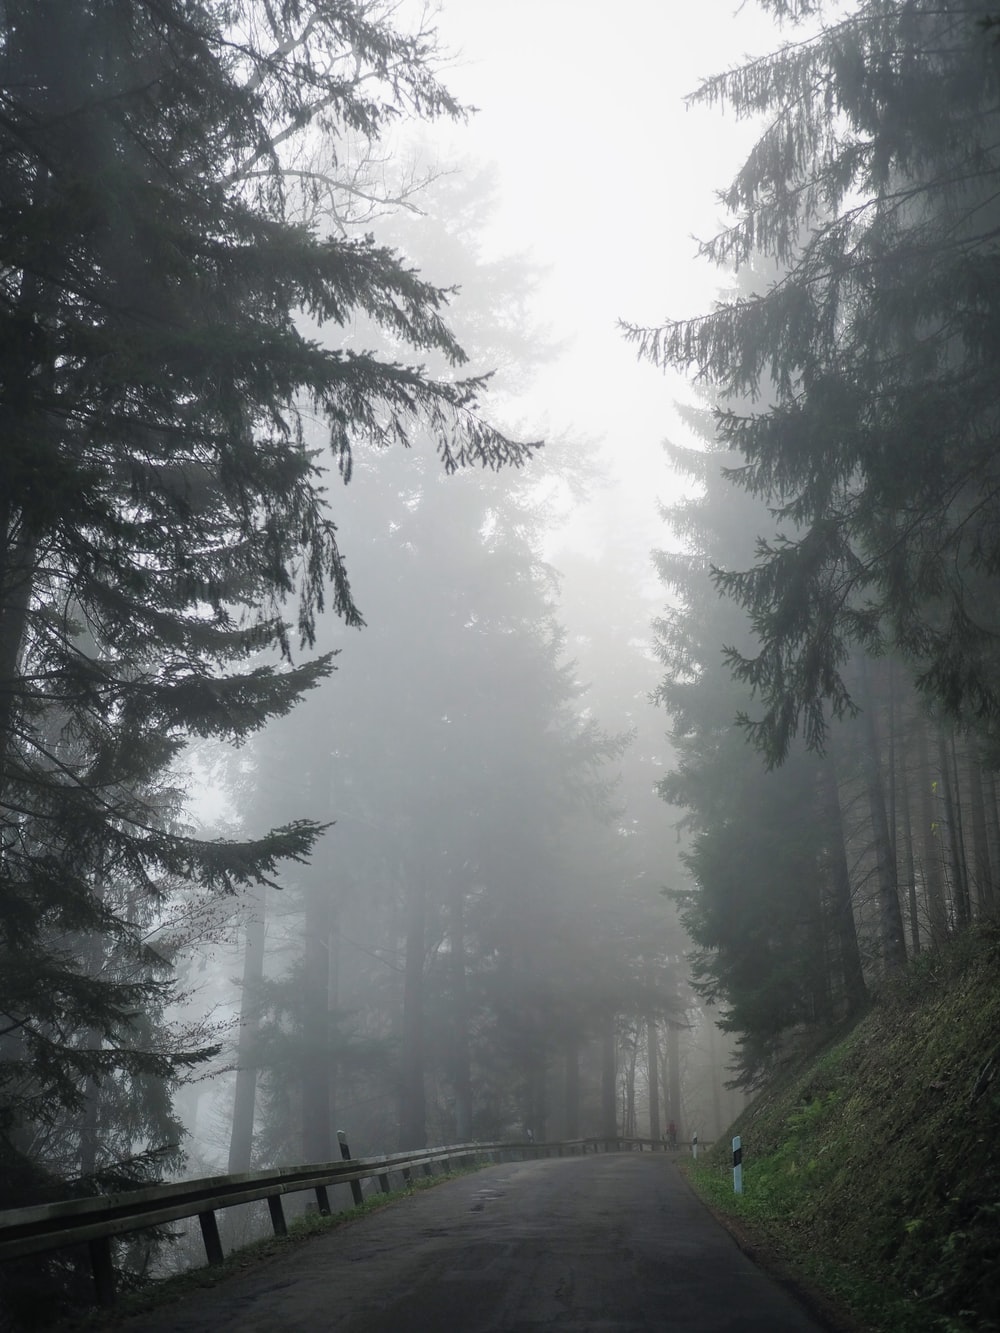 Foggy Road Picture. Download Free Image